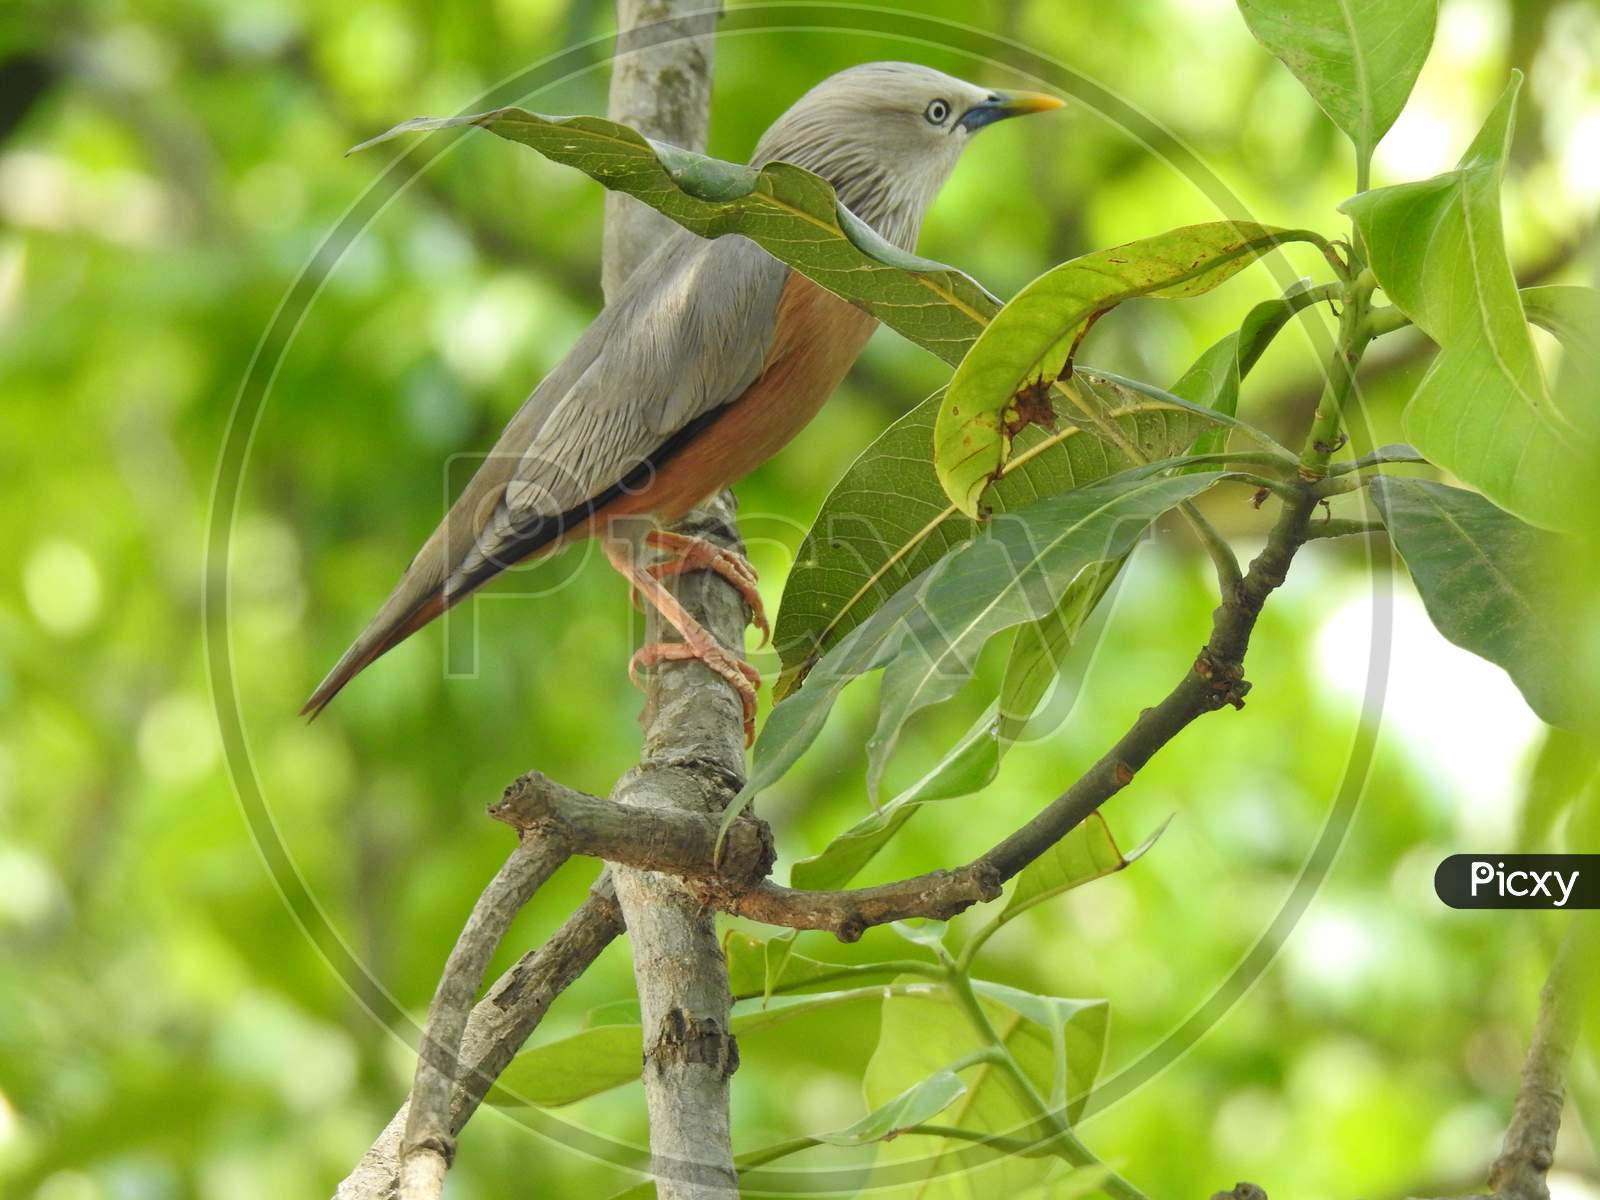 Chestnut tailed starling